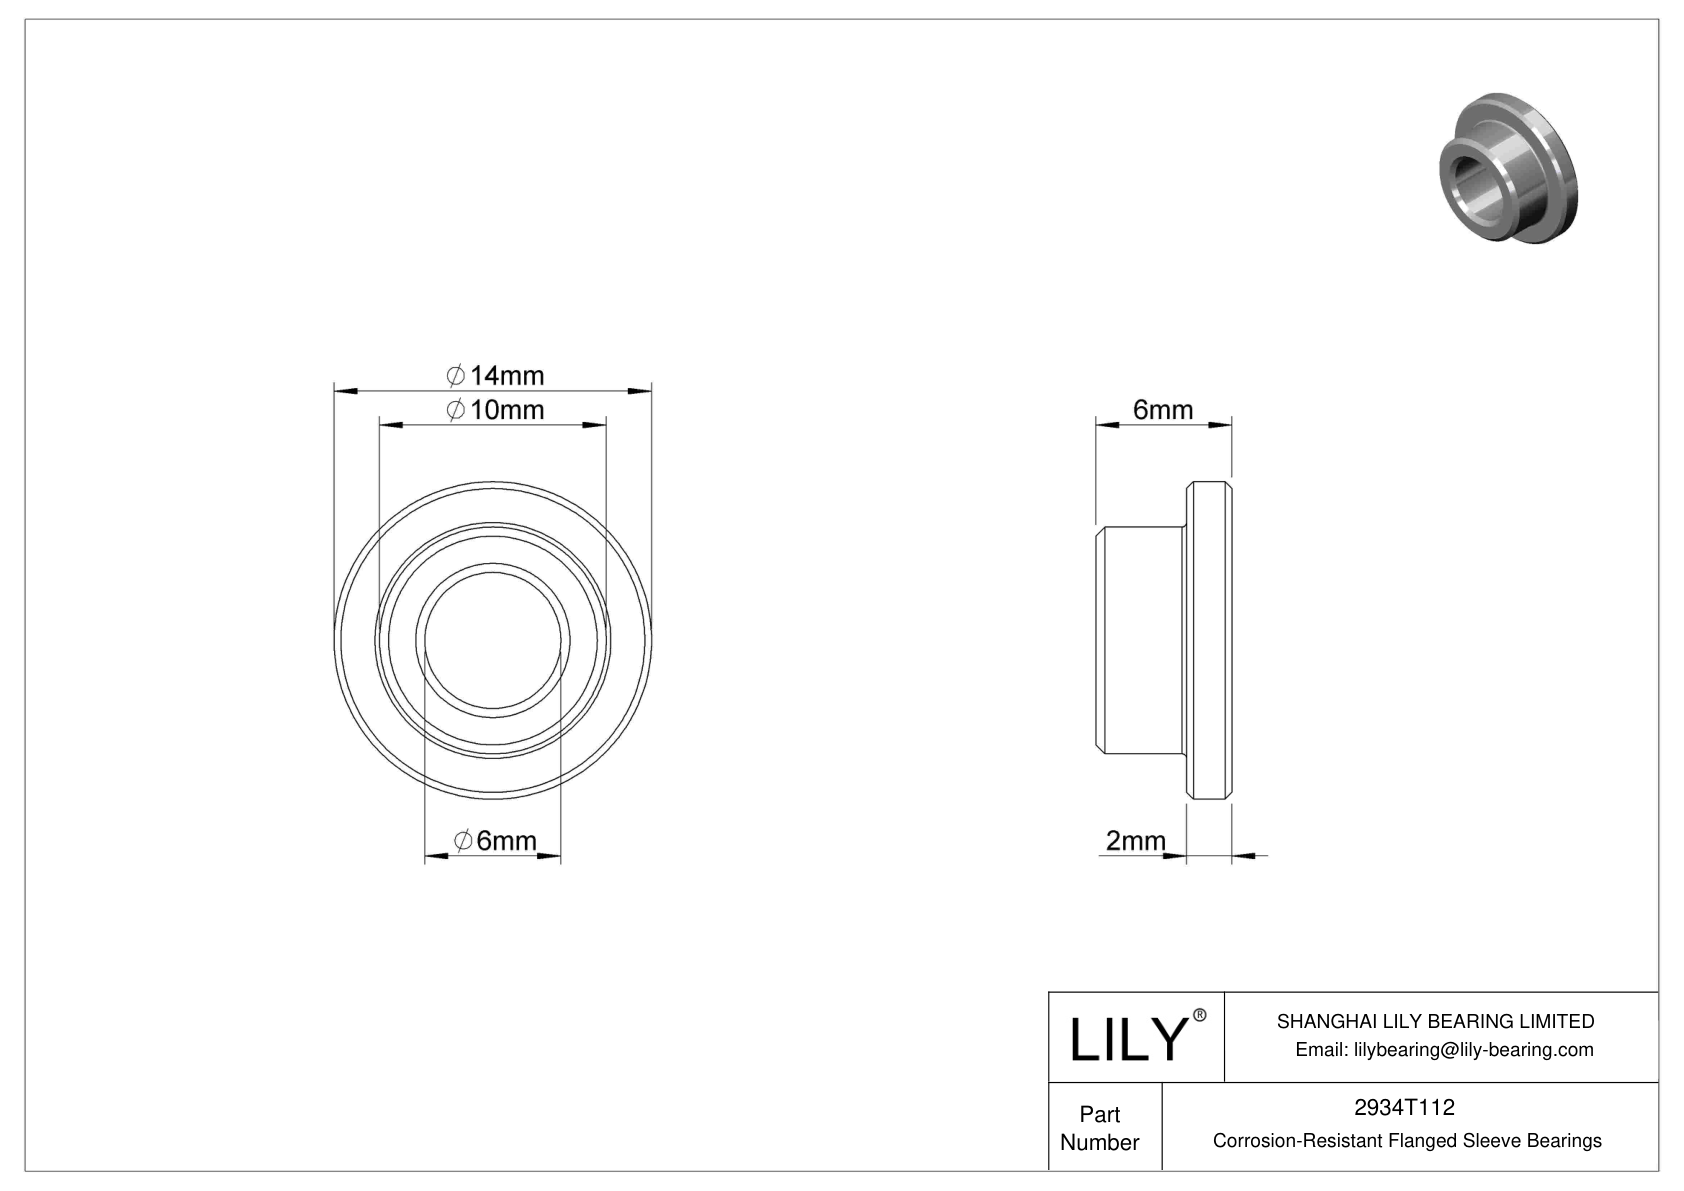 CJDETBBC Corrosion-Resistant Flanged Sleeve Bearings cad drawing